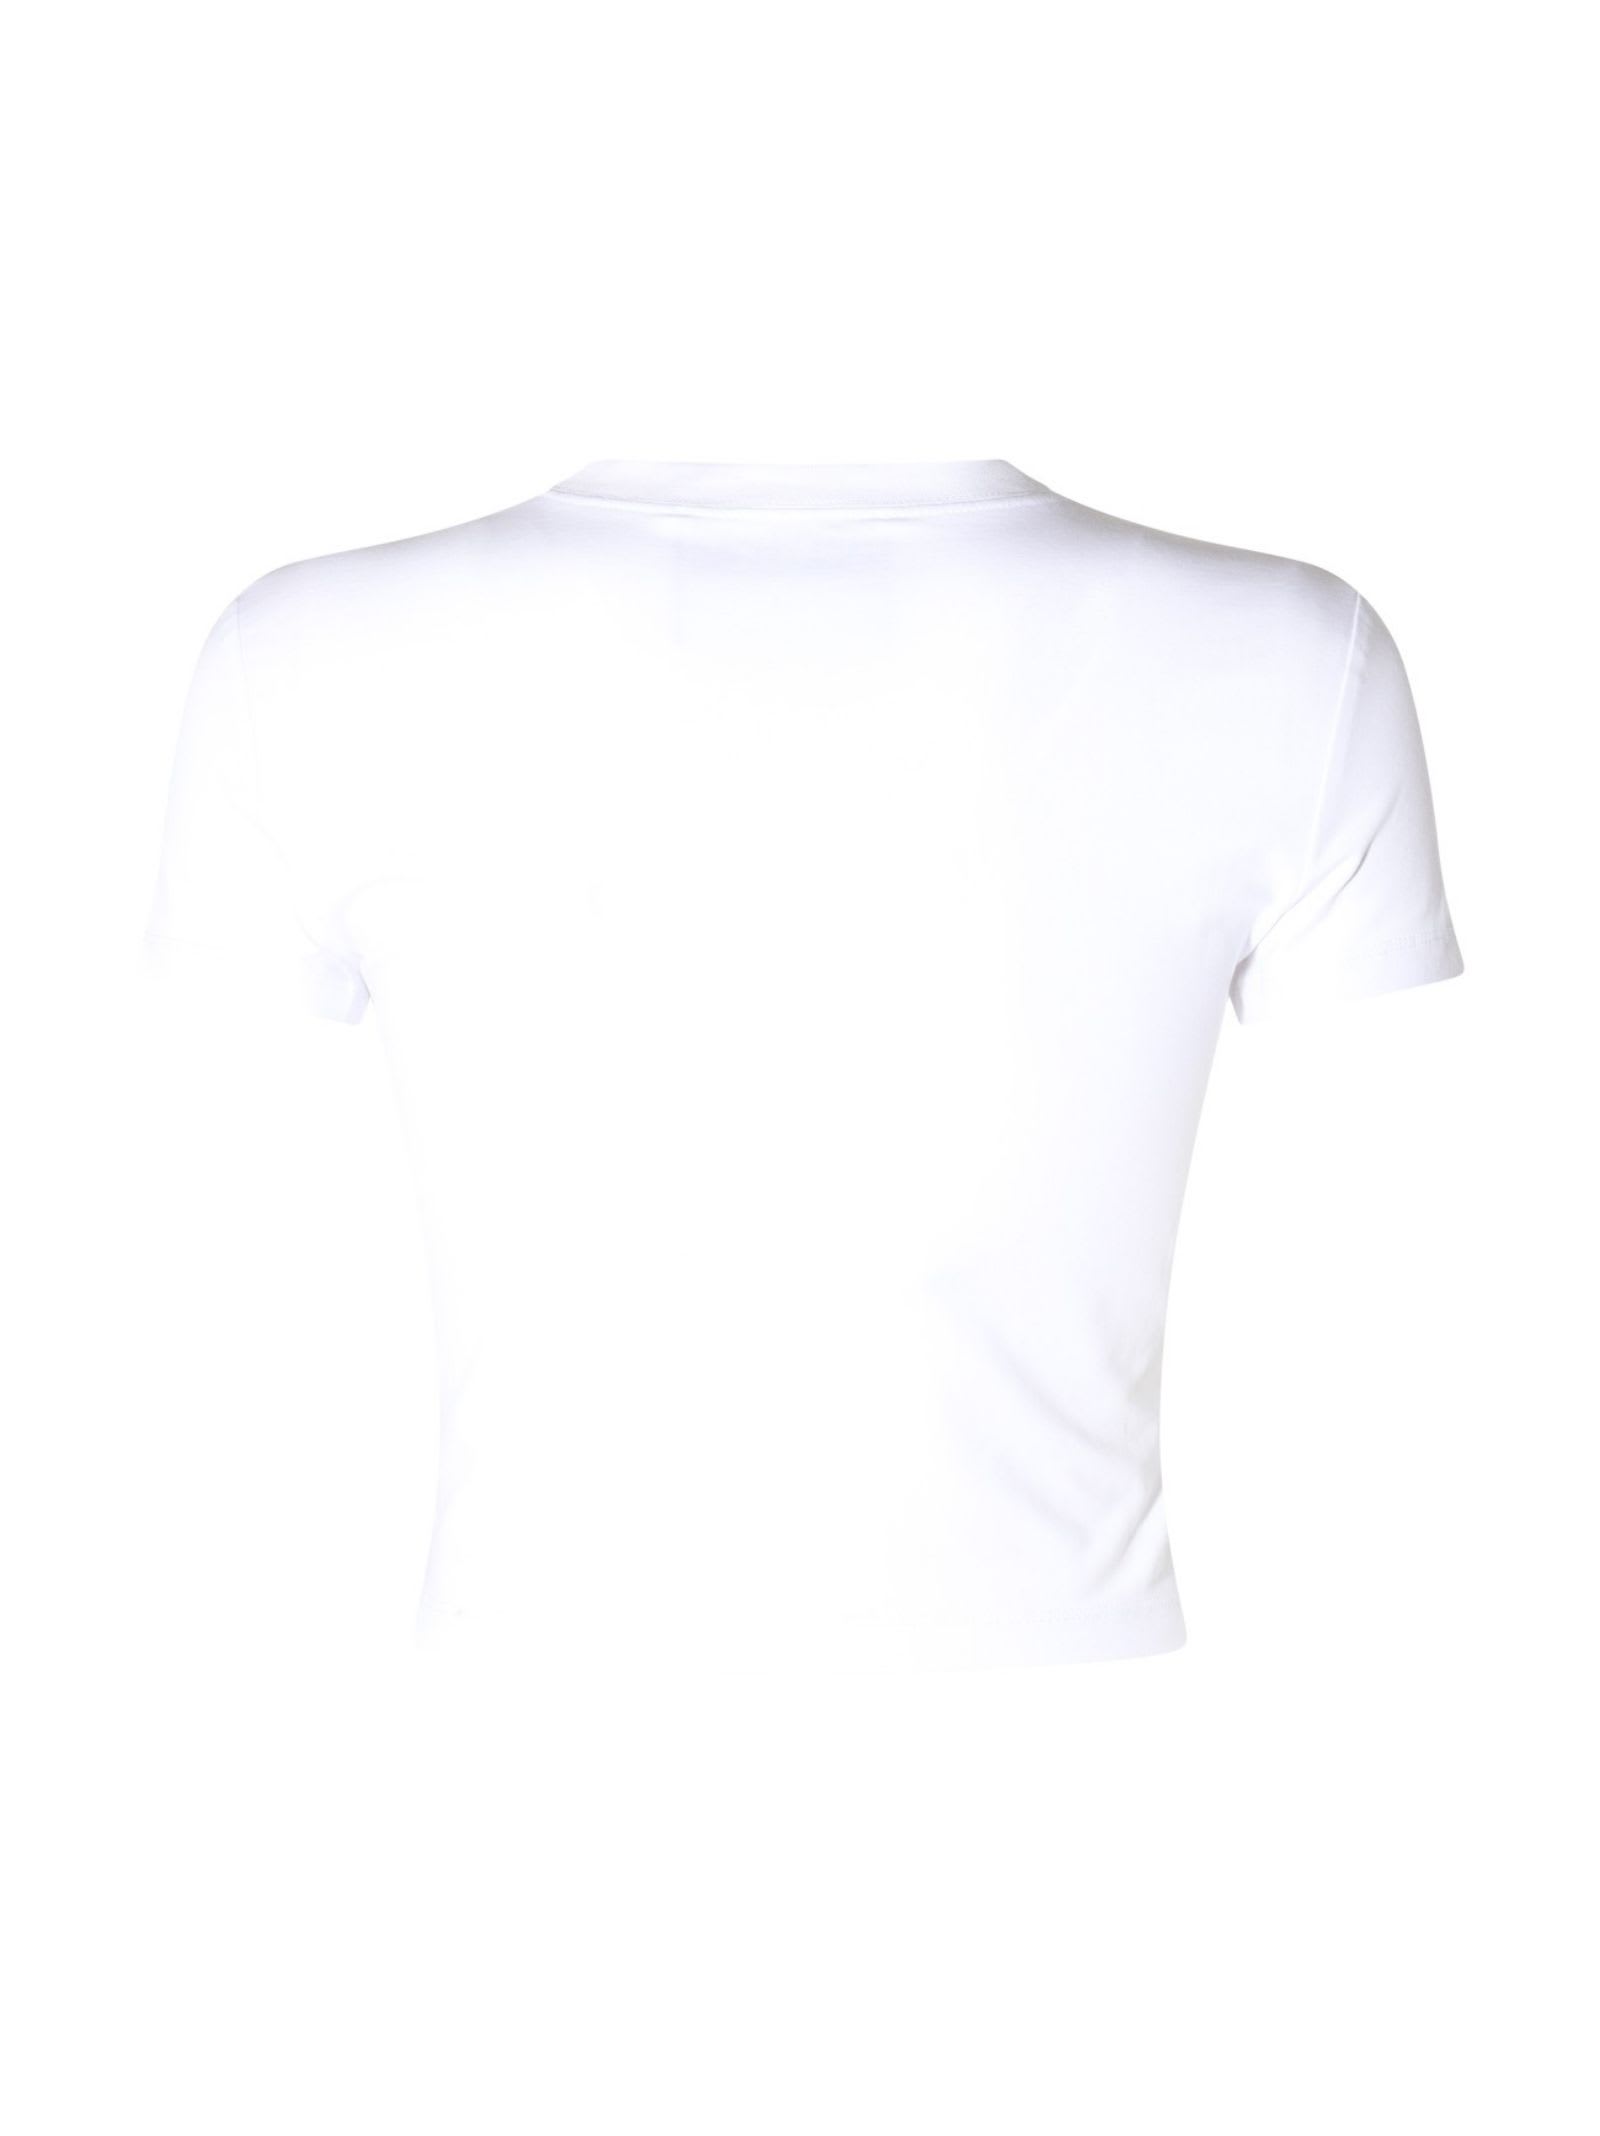 Shop Versace Jeans Couture T-shirt In White